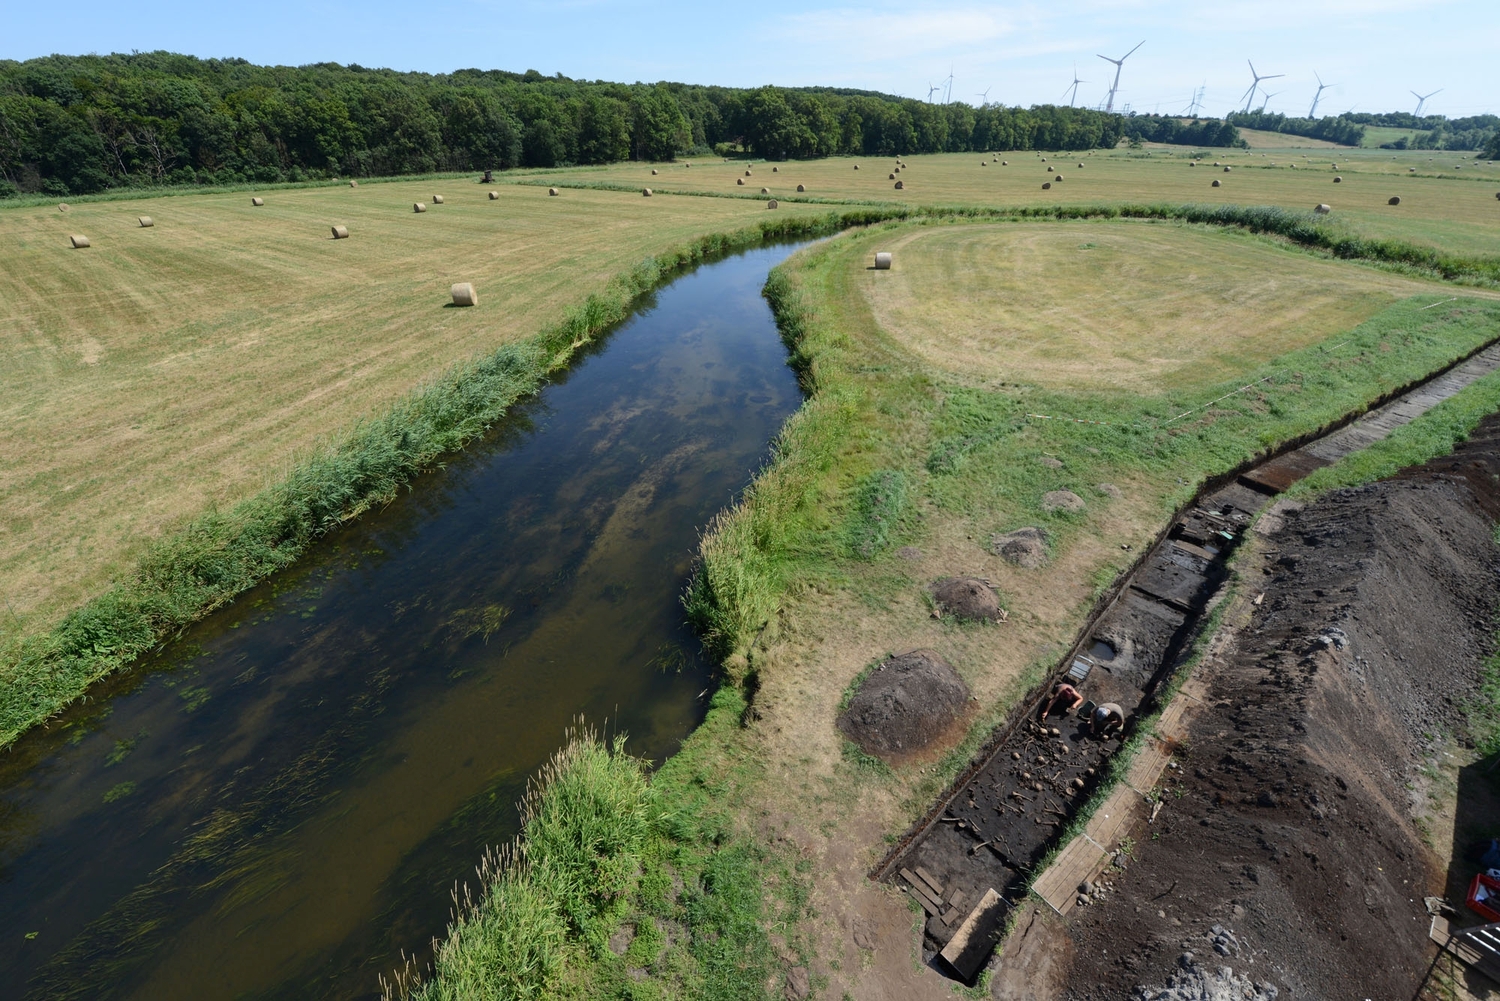 View of the excavation site close to the Tollense river in Weltzin where many human remains and objects were found